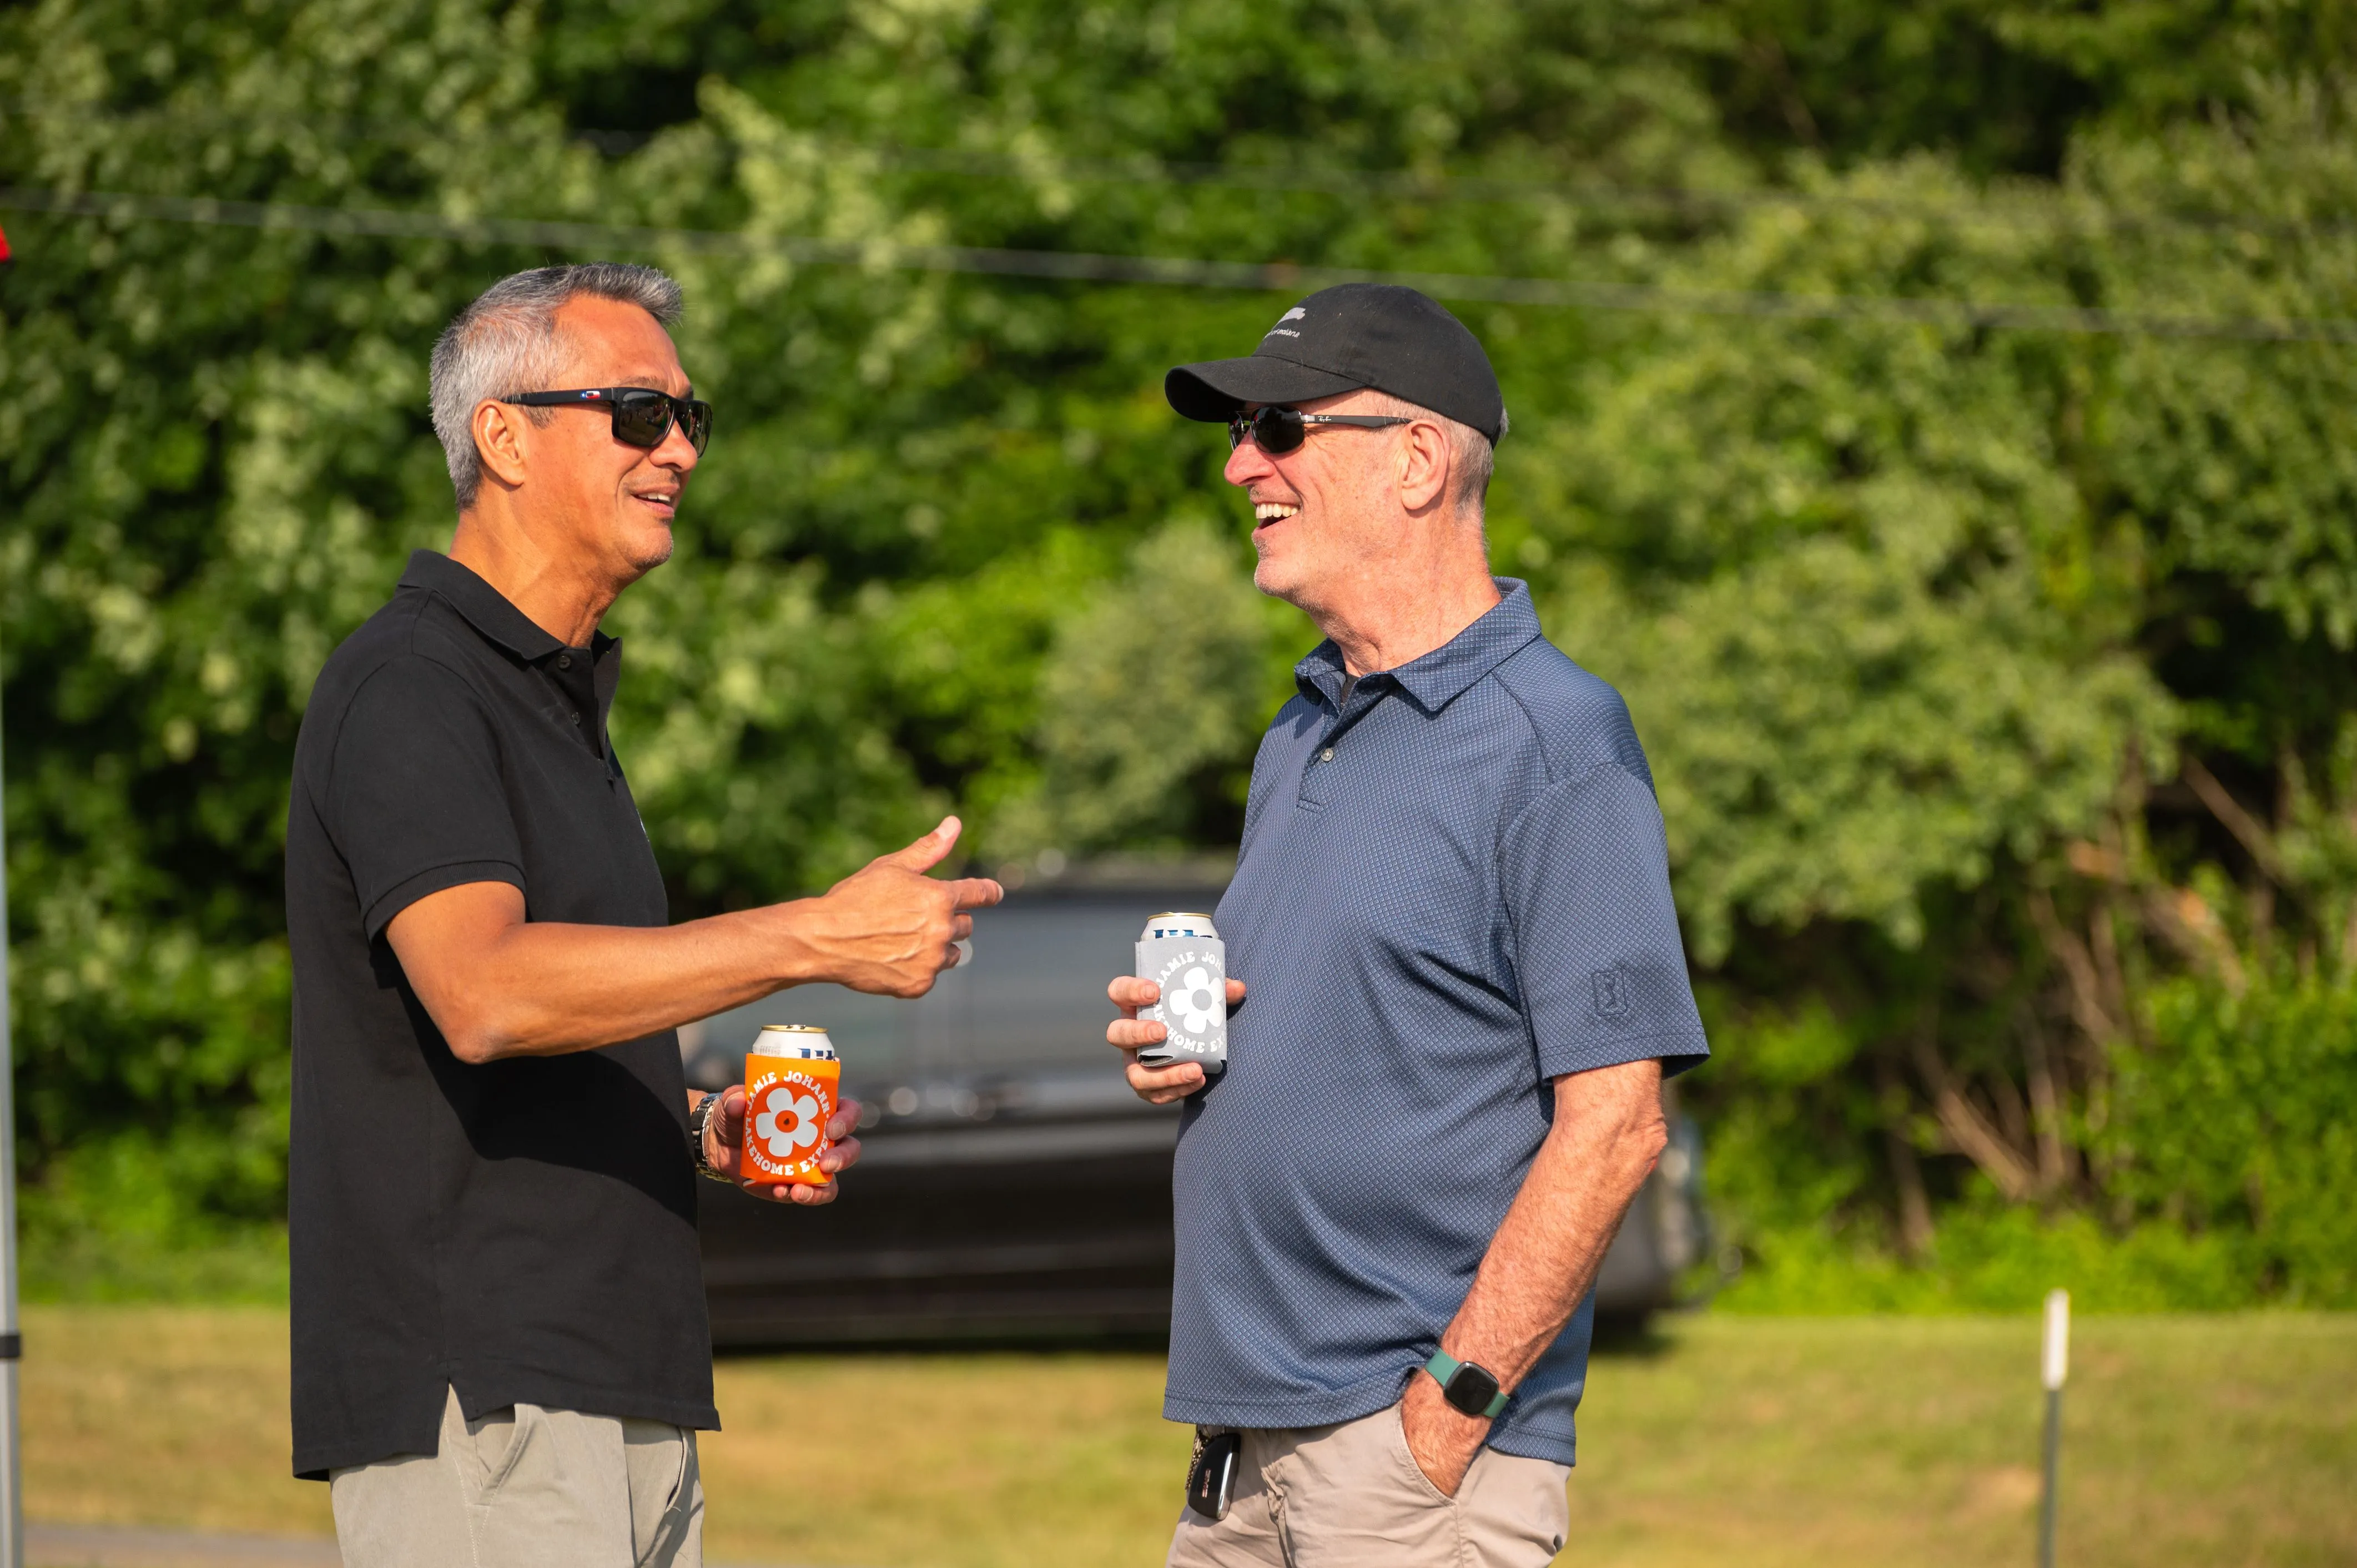 Two men talking outdoors with one pointing and both holding drinks, with trees in the background.